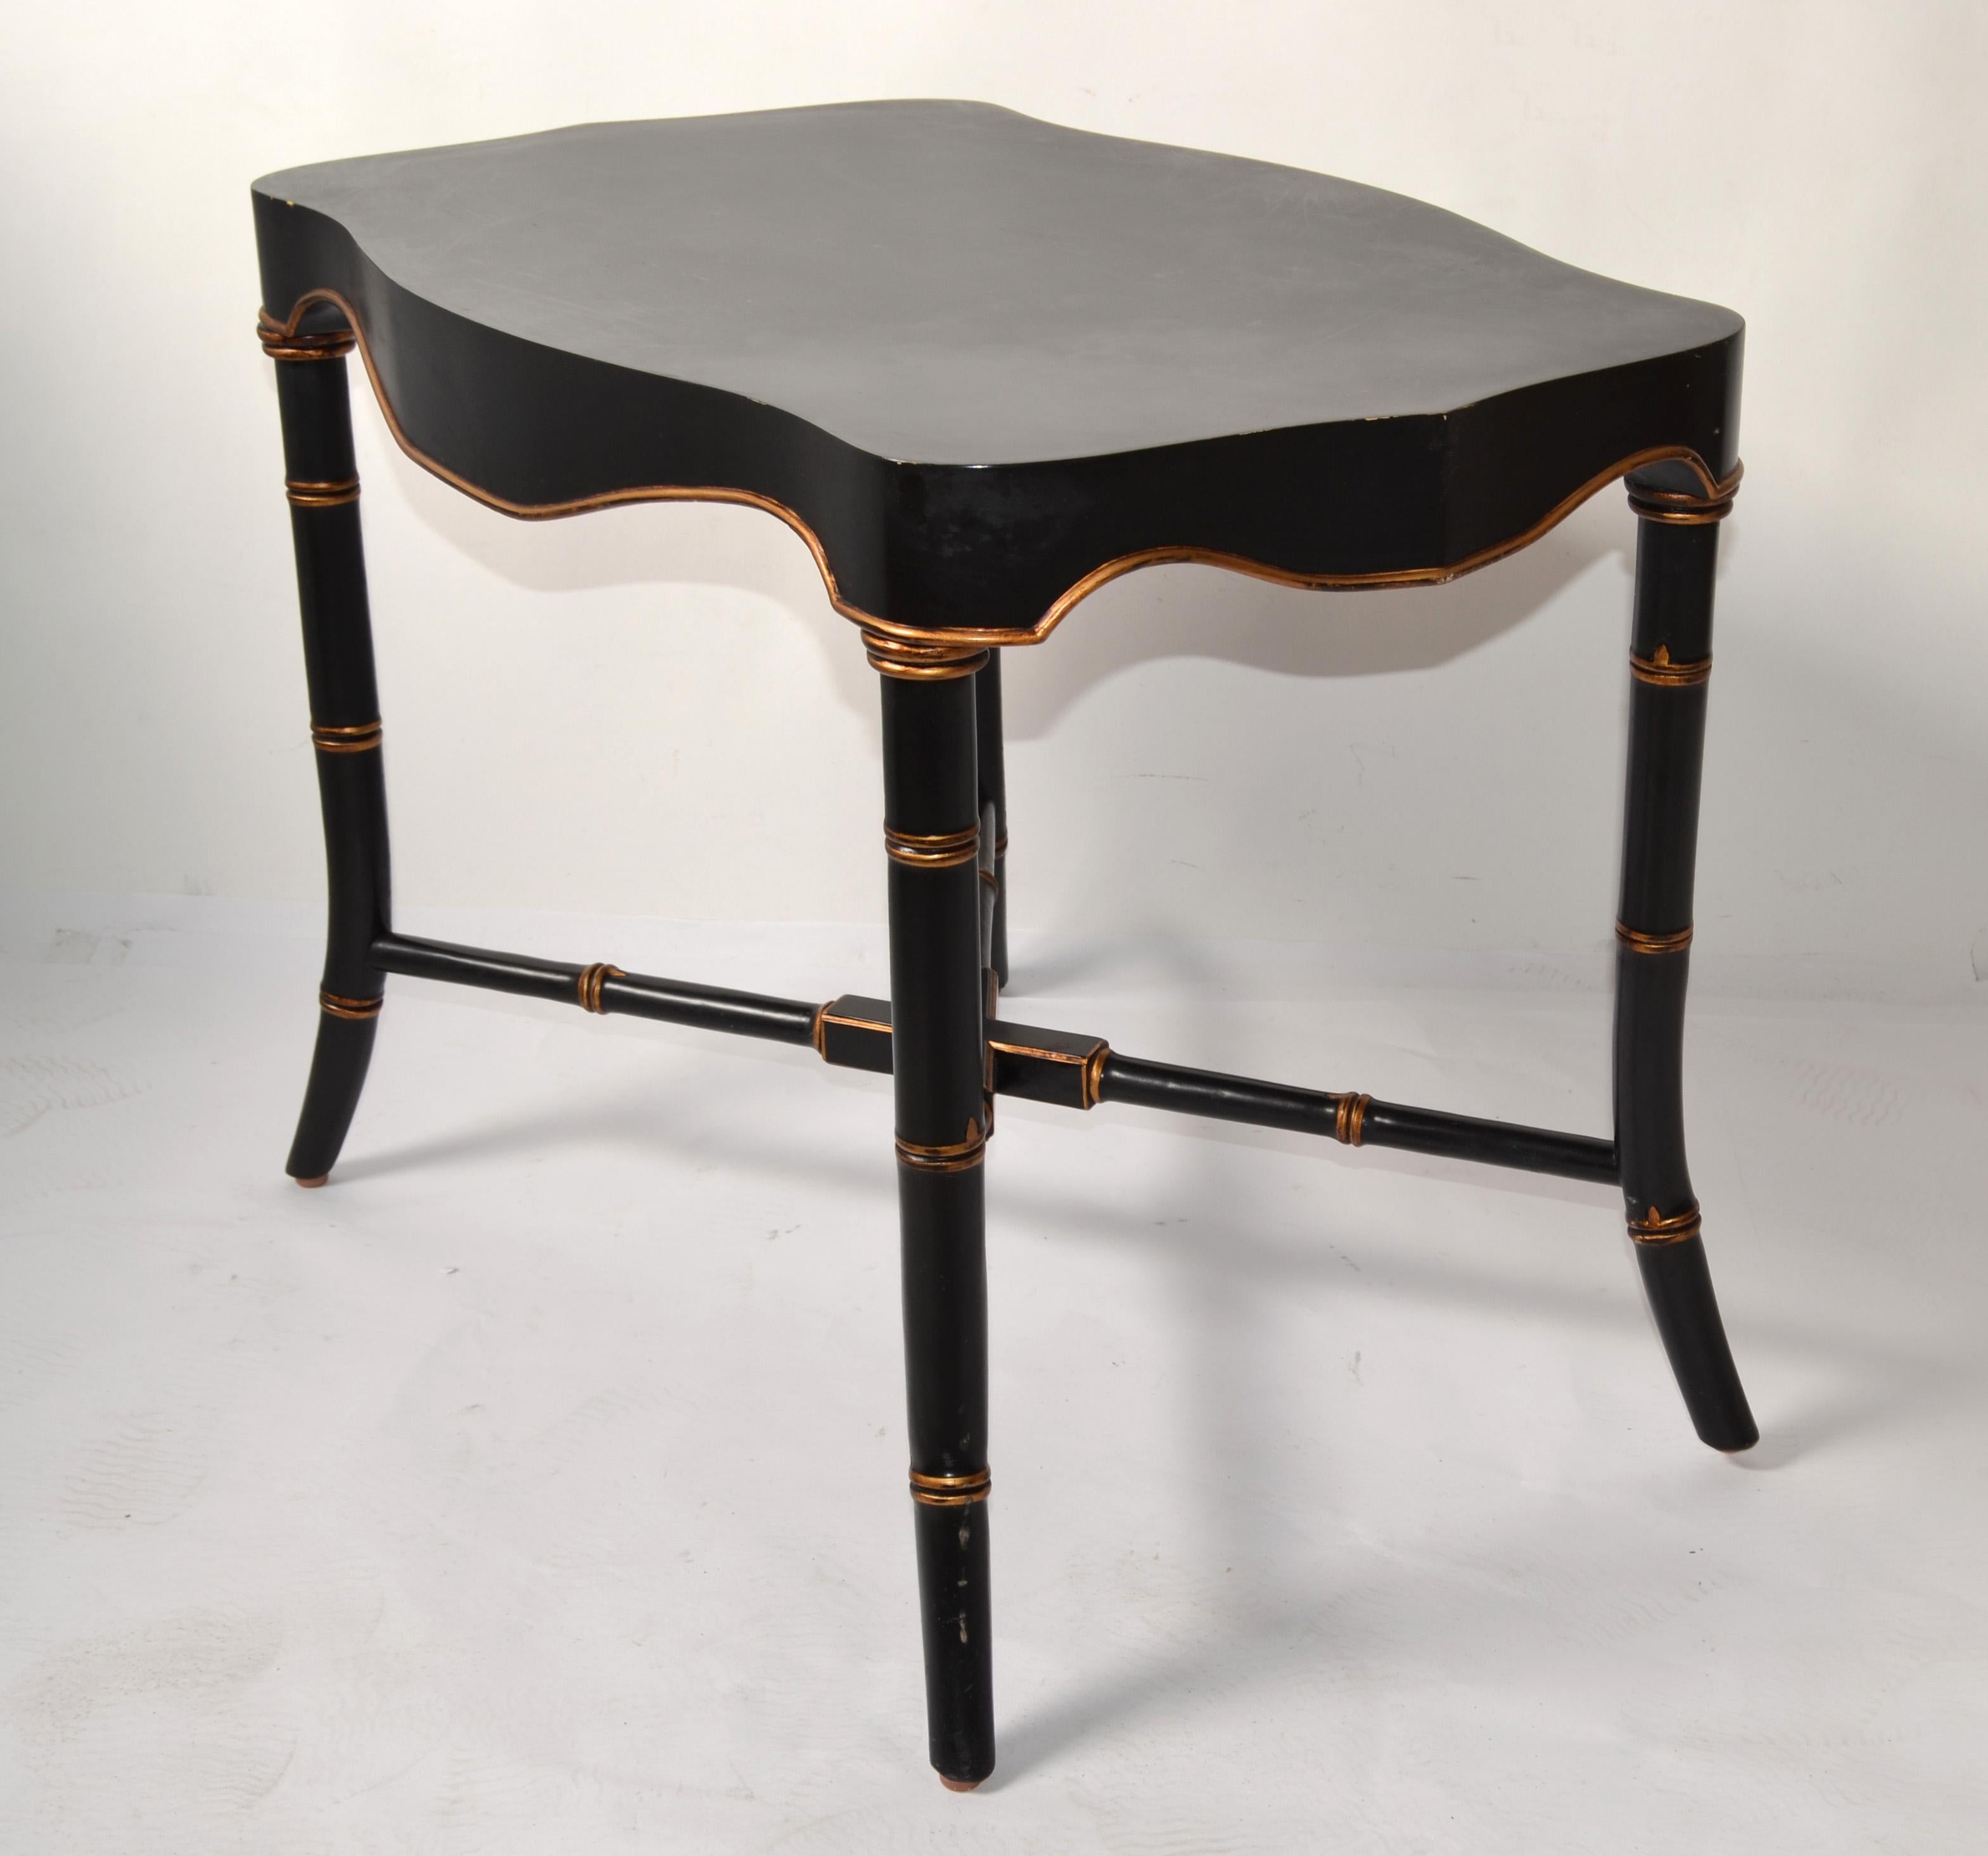 Hand-Crafted Victorian Mid-20th Century Black Gold Finish Accent Table Faux Bamboo Cross Base For Sale